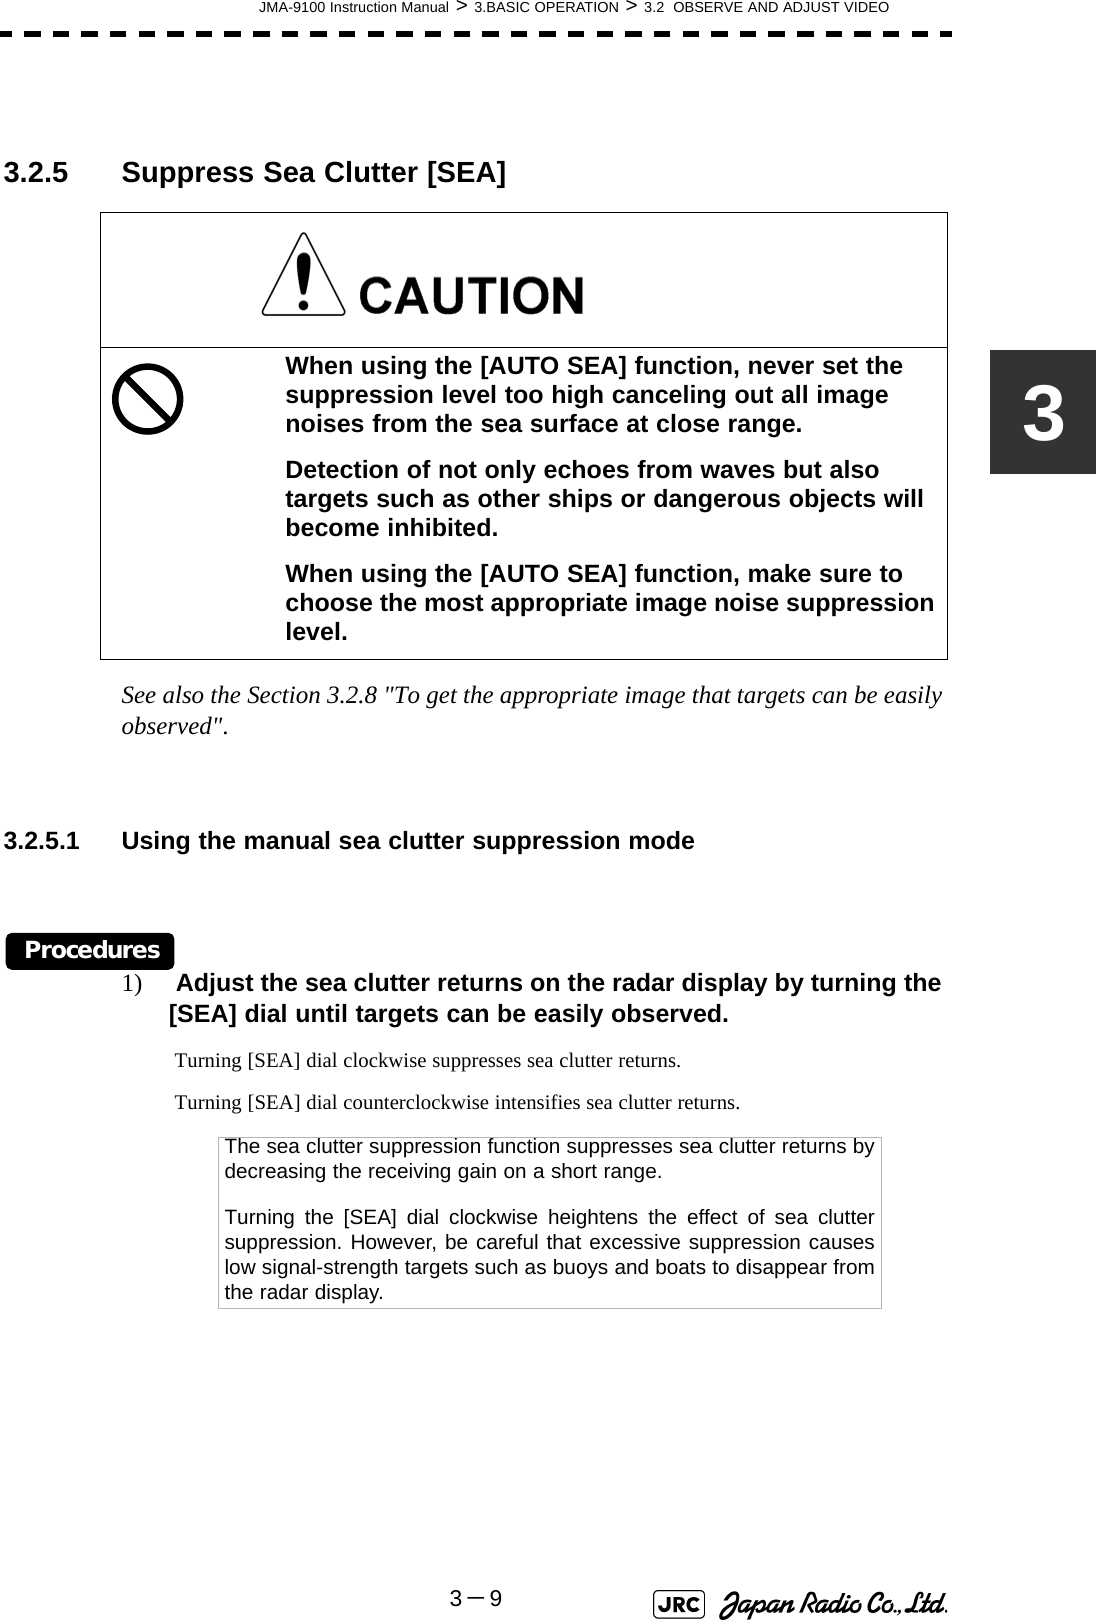 JMA-9100 Instruction Manual &gt; 3.BASIC OPERATION &gt; 3.2  OBSERVE AND ADJUST VIDEO3－933.2.5 Suppress Sea Clutter [SEA] See also the Section 3.2.8 &quot;To get the appropriate image that targets can be easily observed&quot;.3.2.5.1 Using the manual sea clutter suppression modeProcedures1)  Adjust the sea clutter returns on the radar display by turning the [SEA] dial until targets can be easily observed. Turning [SEA] dial clockwise suppresses sea clutter returns. Turning [SEA] dial counterclockwise intensifies sea clutter returns.When using the [AUTO SEA] function, never set the suppression level too high canceling out all image noises from the sea surface at close range.Detection of not only echoes from waves but also targets such as other ships or dangerous objects will become inhibited.When using the [AUTO SEA] function, make sure to choose the most appropriate image noise suppression level.The sea clutter suppression function suppresses sea clutter returns bydecreasing the receiving gain on a short range.Turning the [SEA] dial clockwise heightens the effect of sea cluttersuppression. However, be careful that excessive suppression causeslow signal-strength targets such as buoys and boats to disappear fromthe radar display.